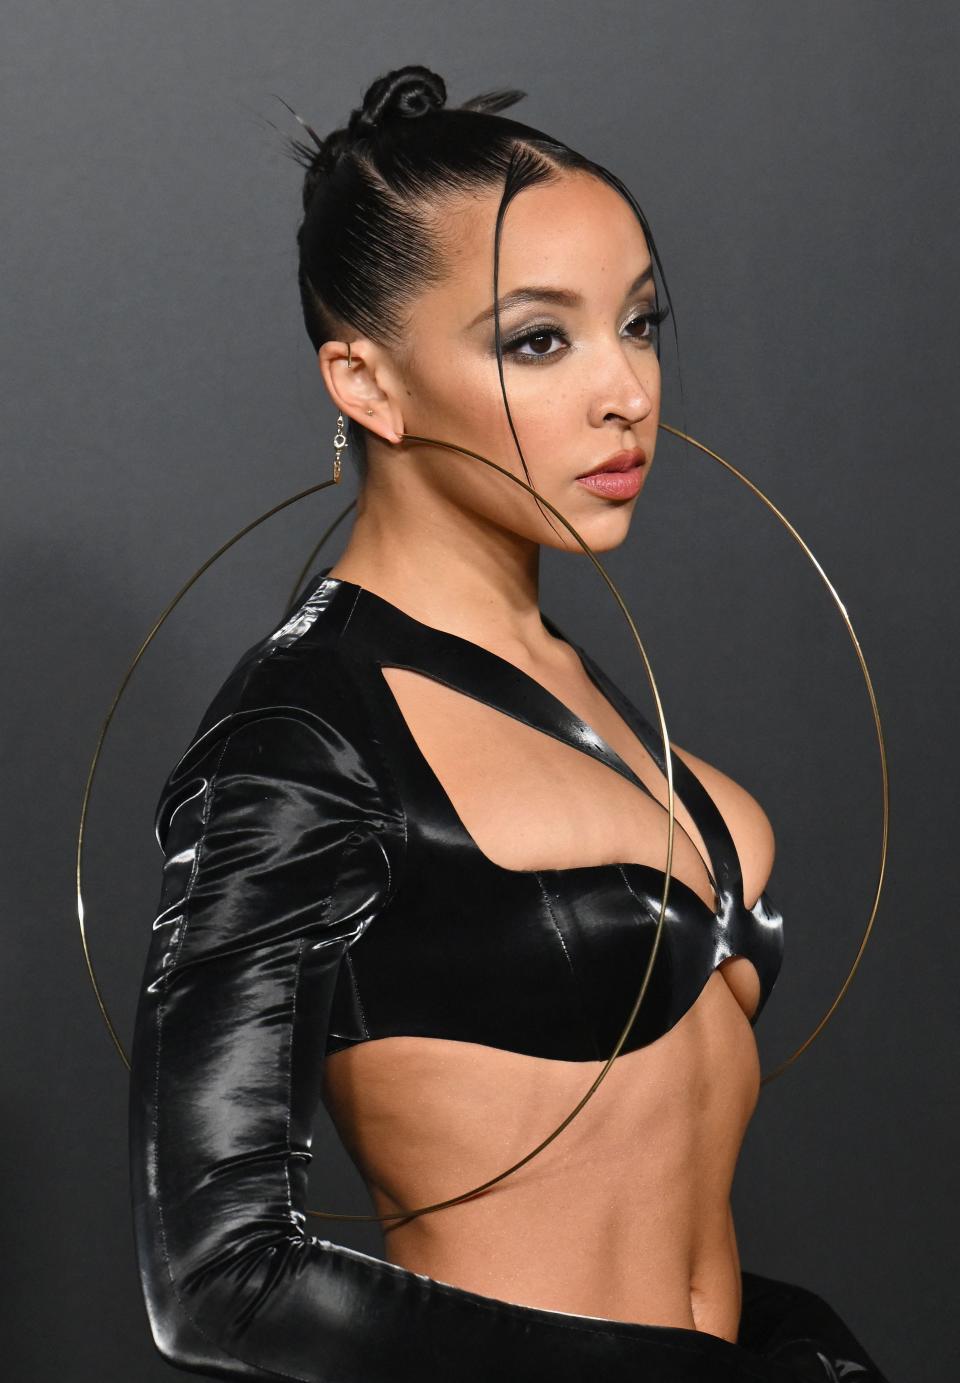 Tinashe arrives to the opening of the "Thierry Mugler: Couturissime" exhibition at the Brooklyn Museum in the Brooklyn borough of New York City, on November 15, 2022.